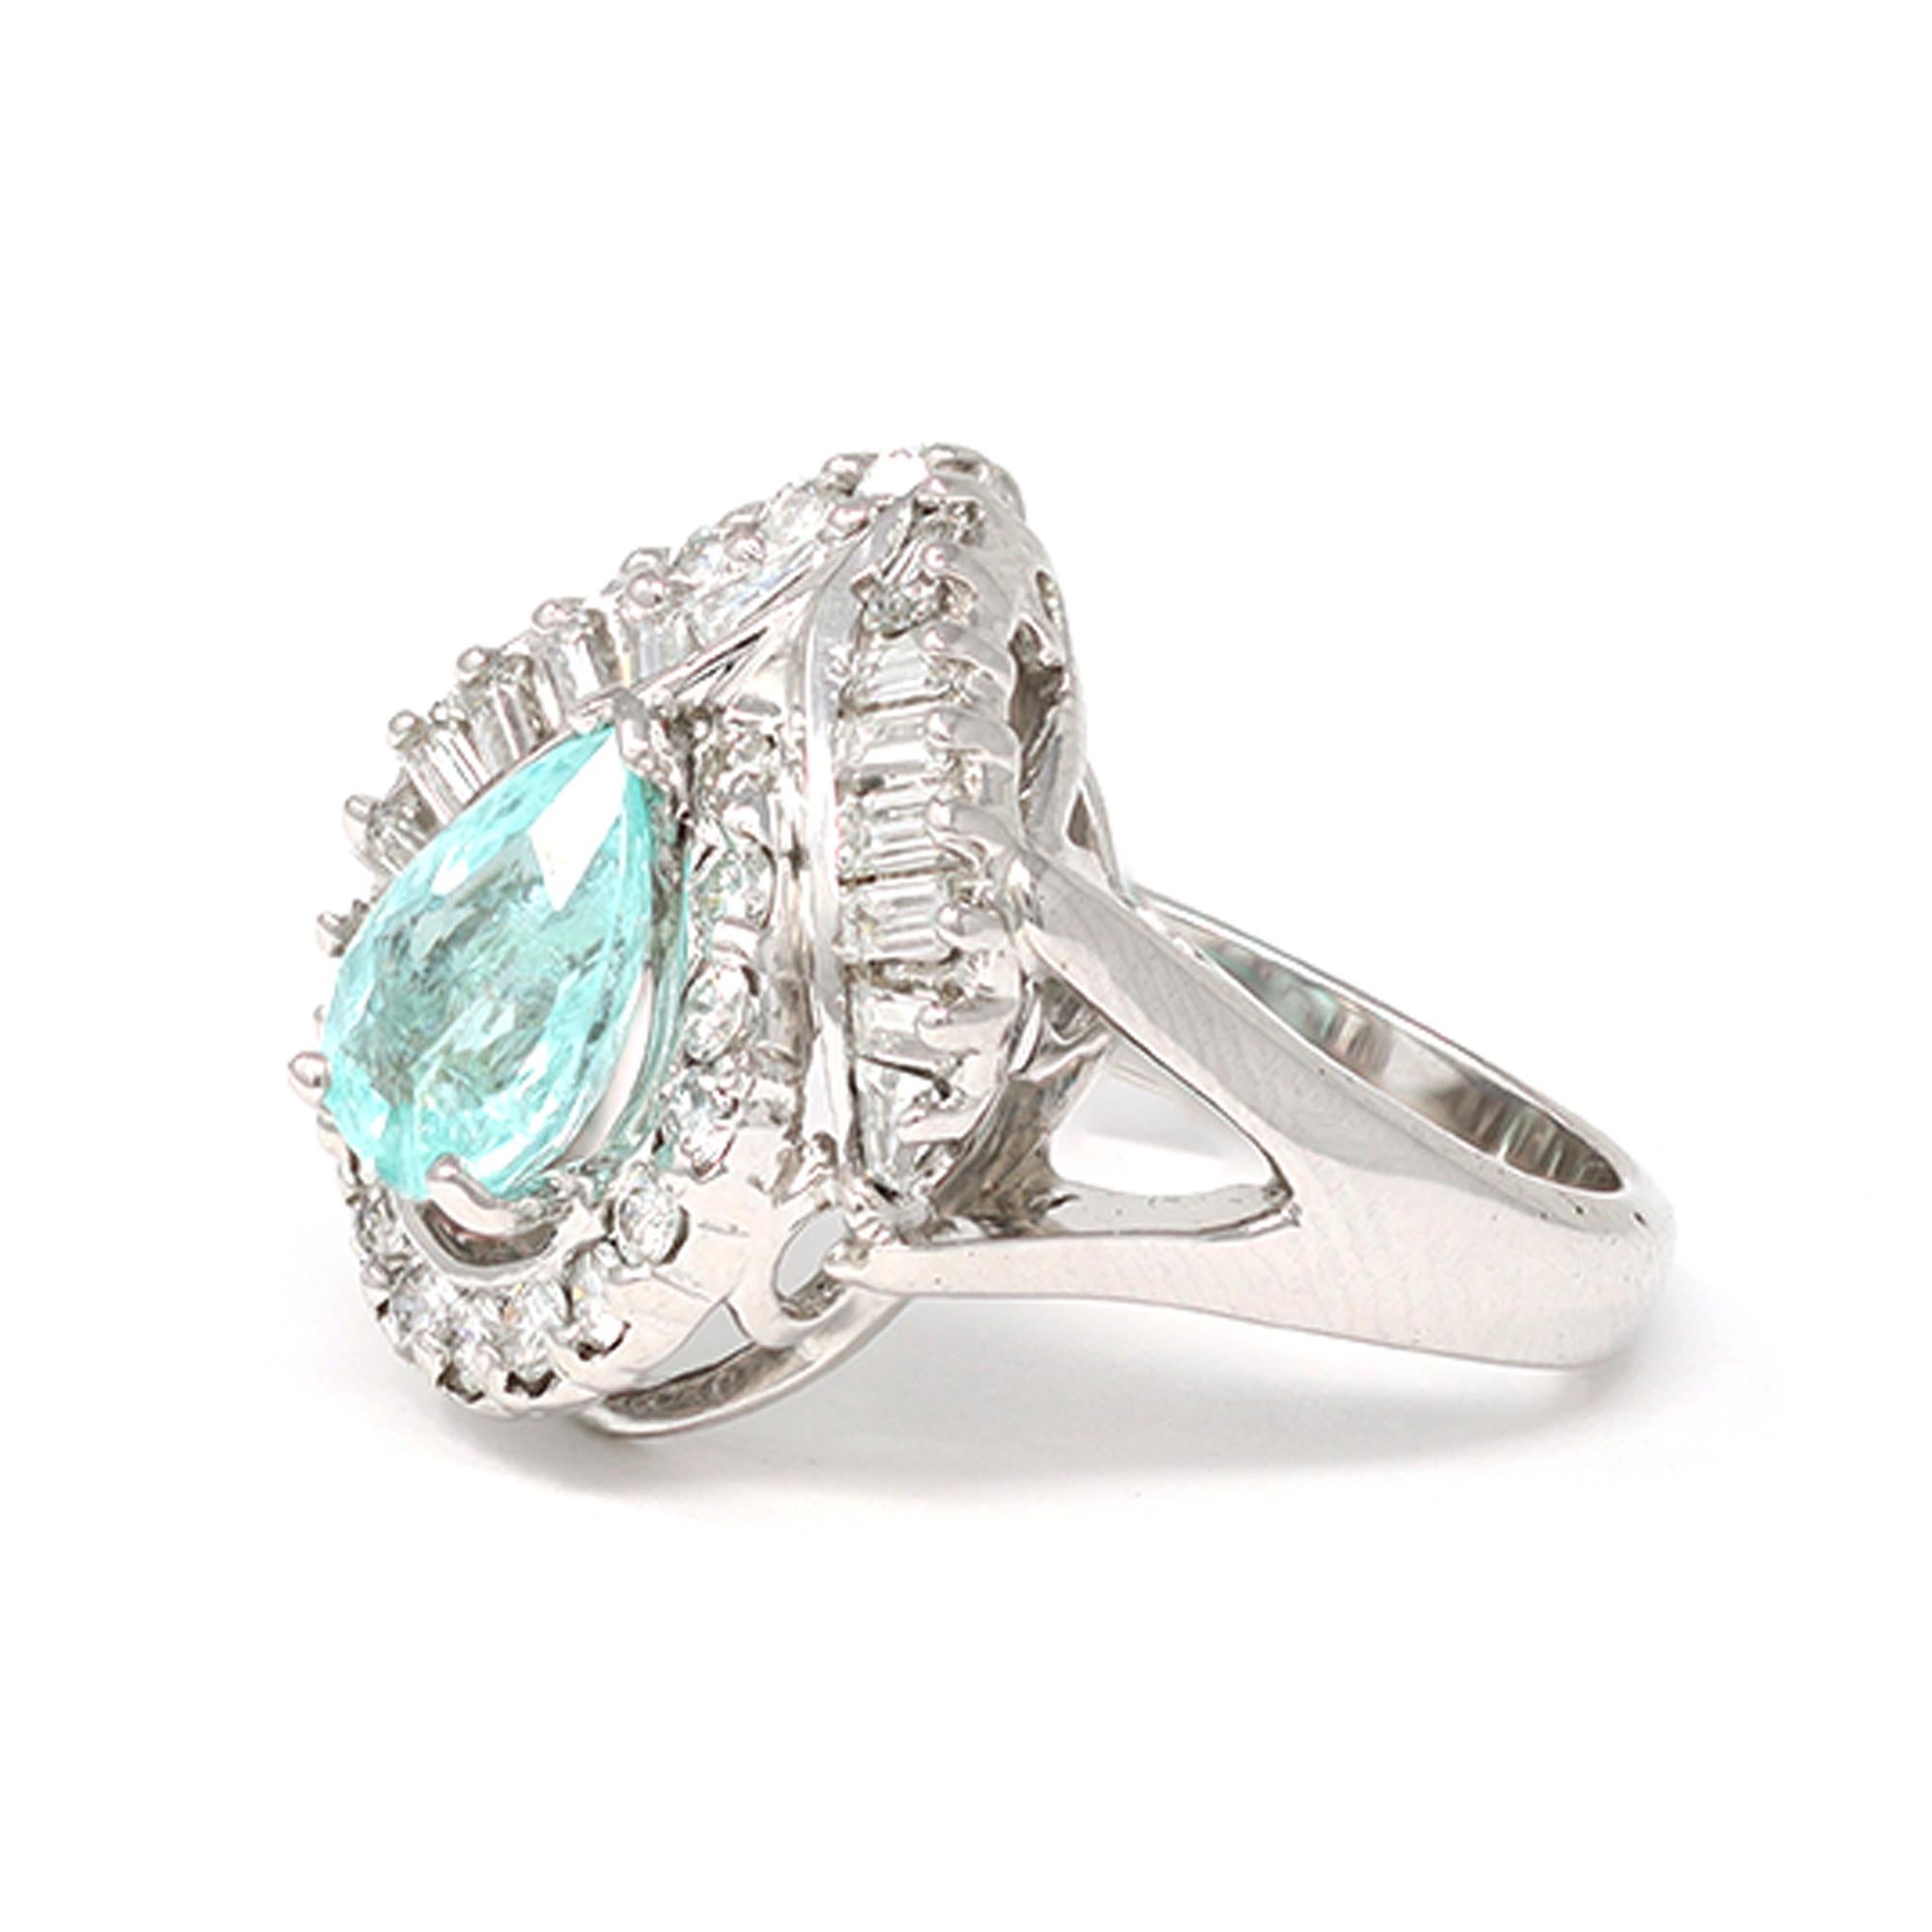 A striking pear-shaped Paraiba tourmaline and diamond ring circa 1990. The vivid turquoise Paraiba Tourmaline weighs 1.26 carats. It is adorned with mixed-cut diamonds. The estimated weight of the diamonds is 0.83 carats, with a grade of GH color